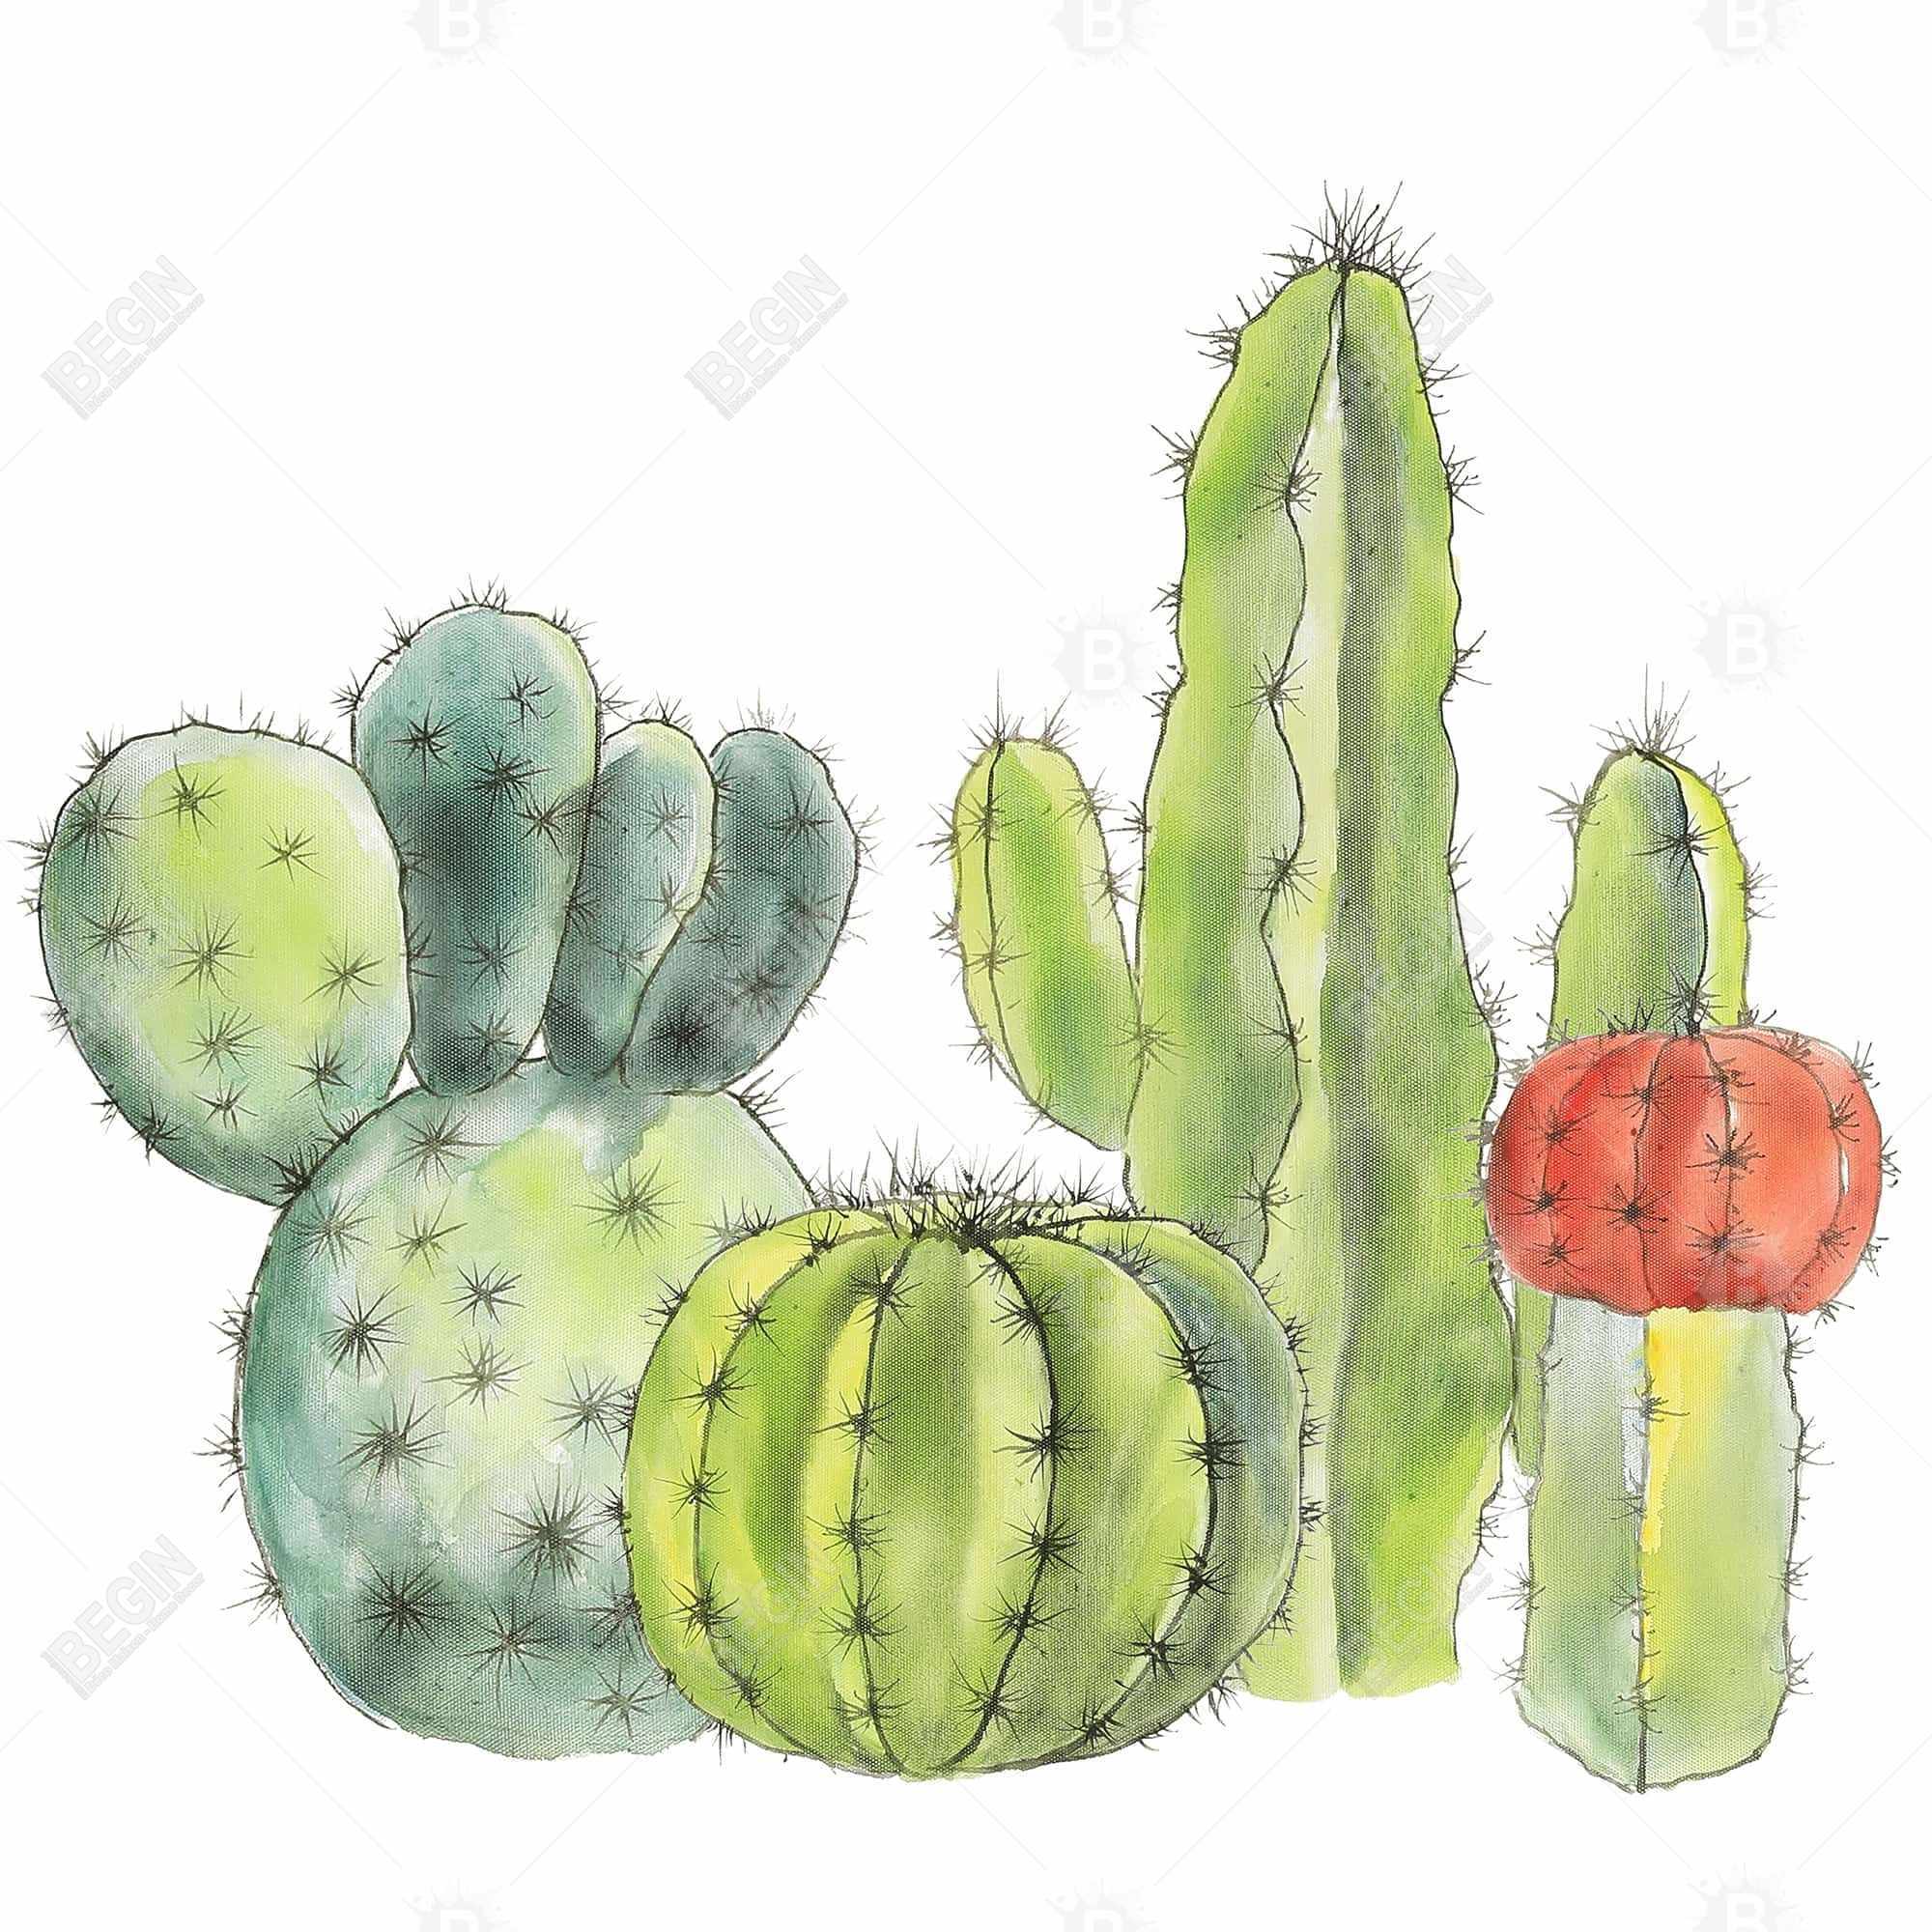 Gathering of small cactus